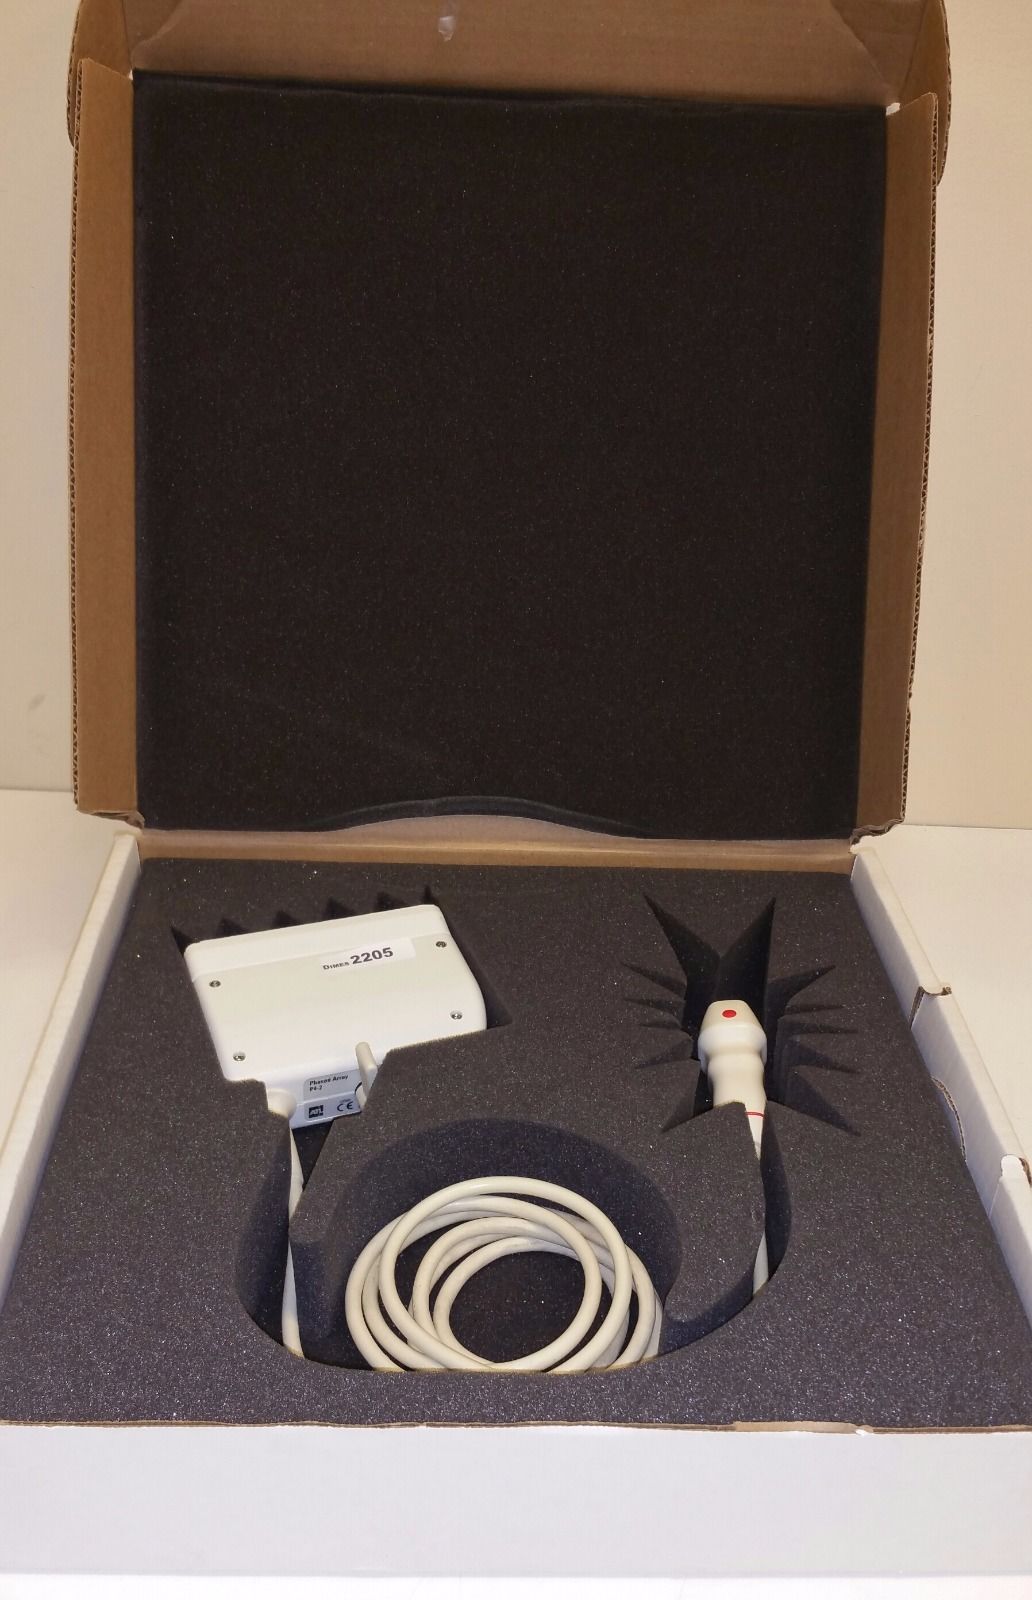 Philips ATL P4-2 Phased Array Ultrasound Transducer Probe Inv 2205 DIAGNOSTIC ULTRASOUND MACHINES FOR SALE